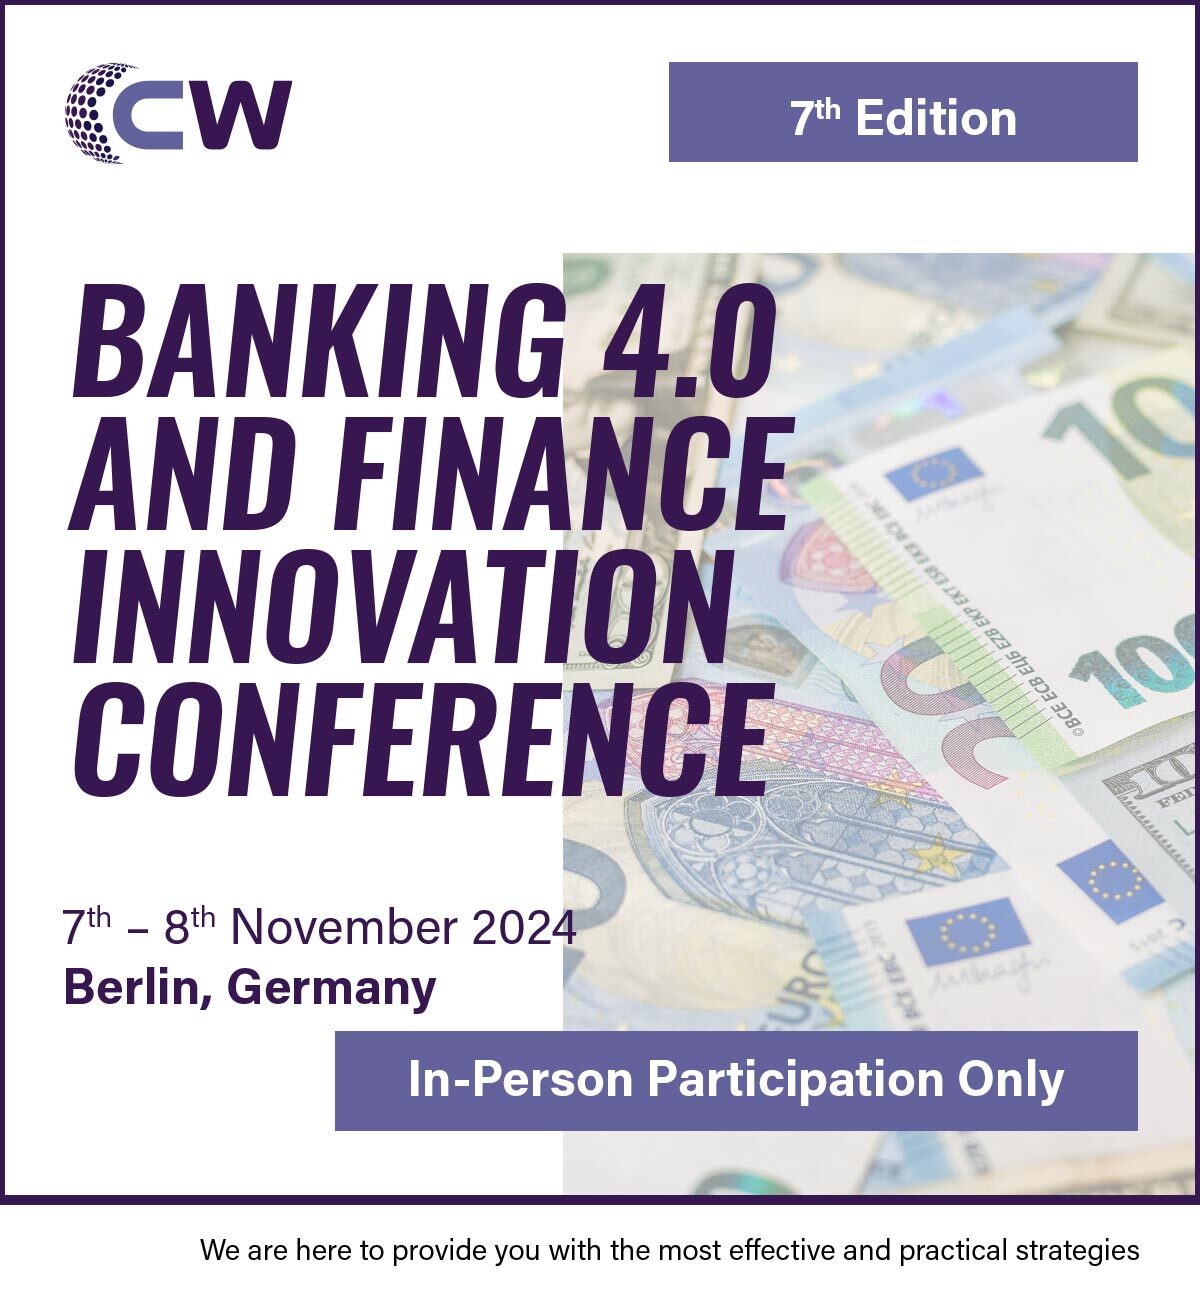 BANKING 4.0 AND BANKING INNOVATION CONFERENCE organized by Conferenzia World